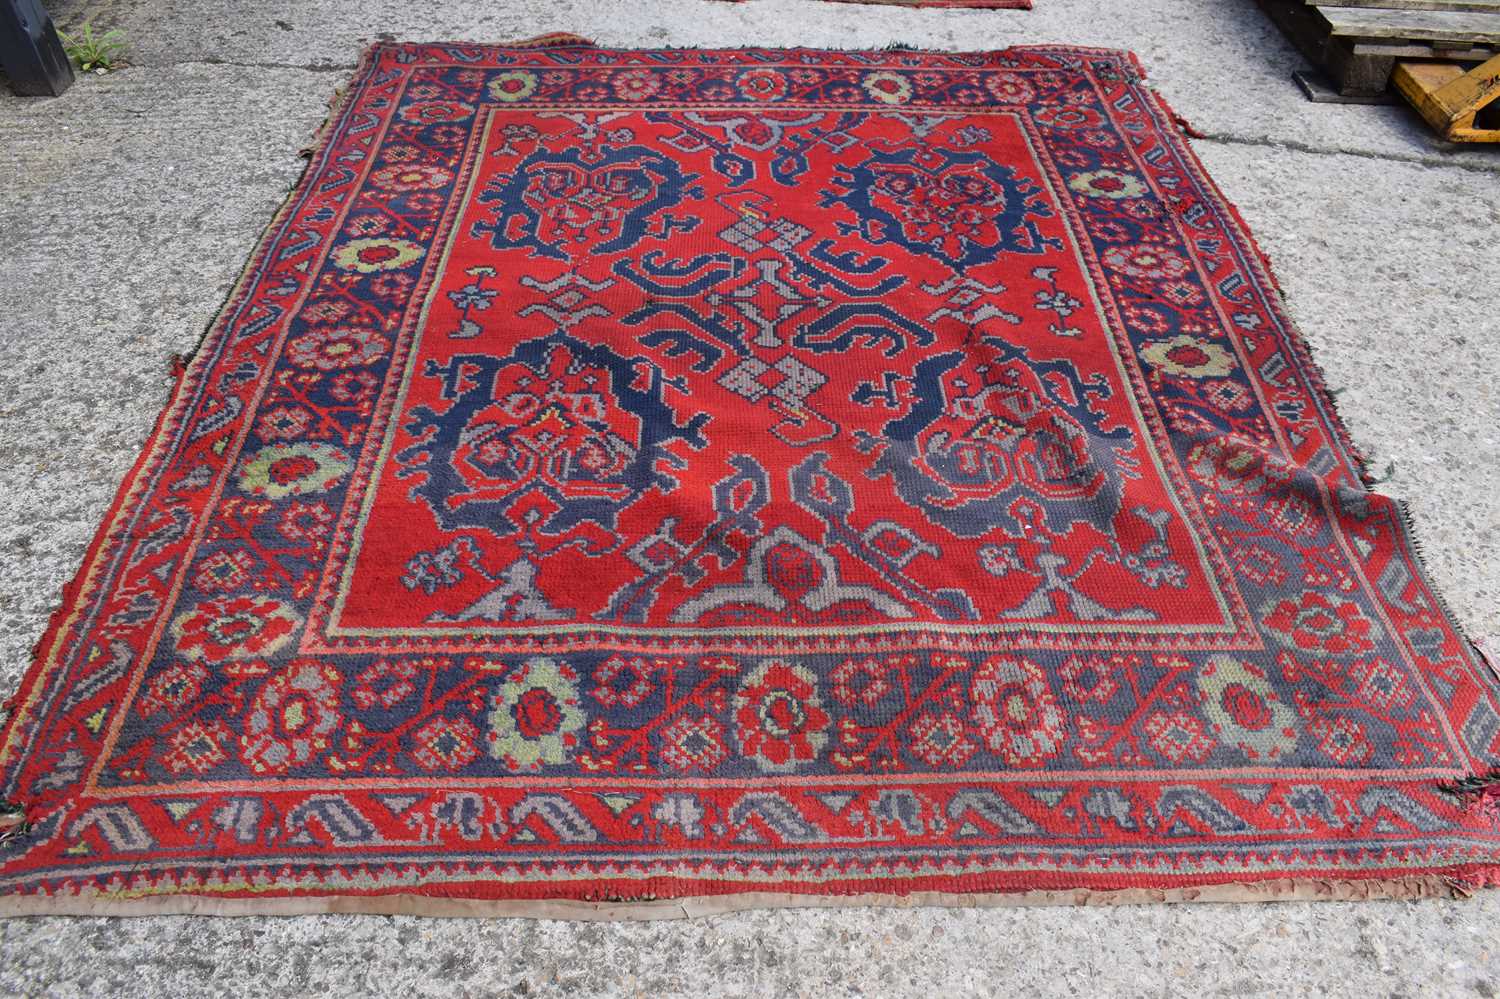 Two antique wool rugs likely Middle Eastern origin both with red ground and stylised motifs and - Image 2 of 13